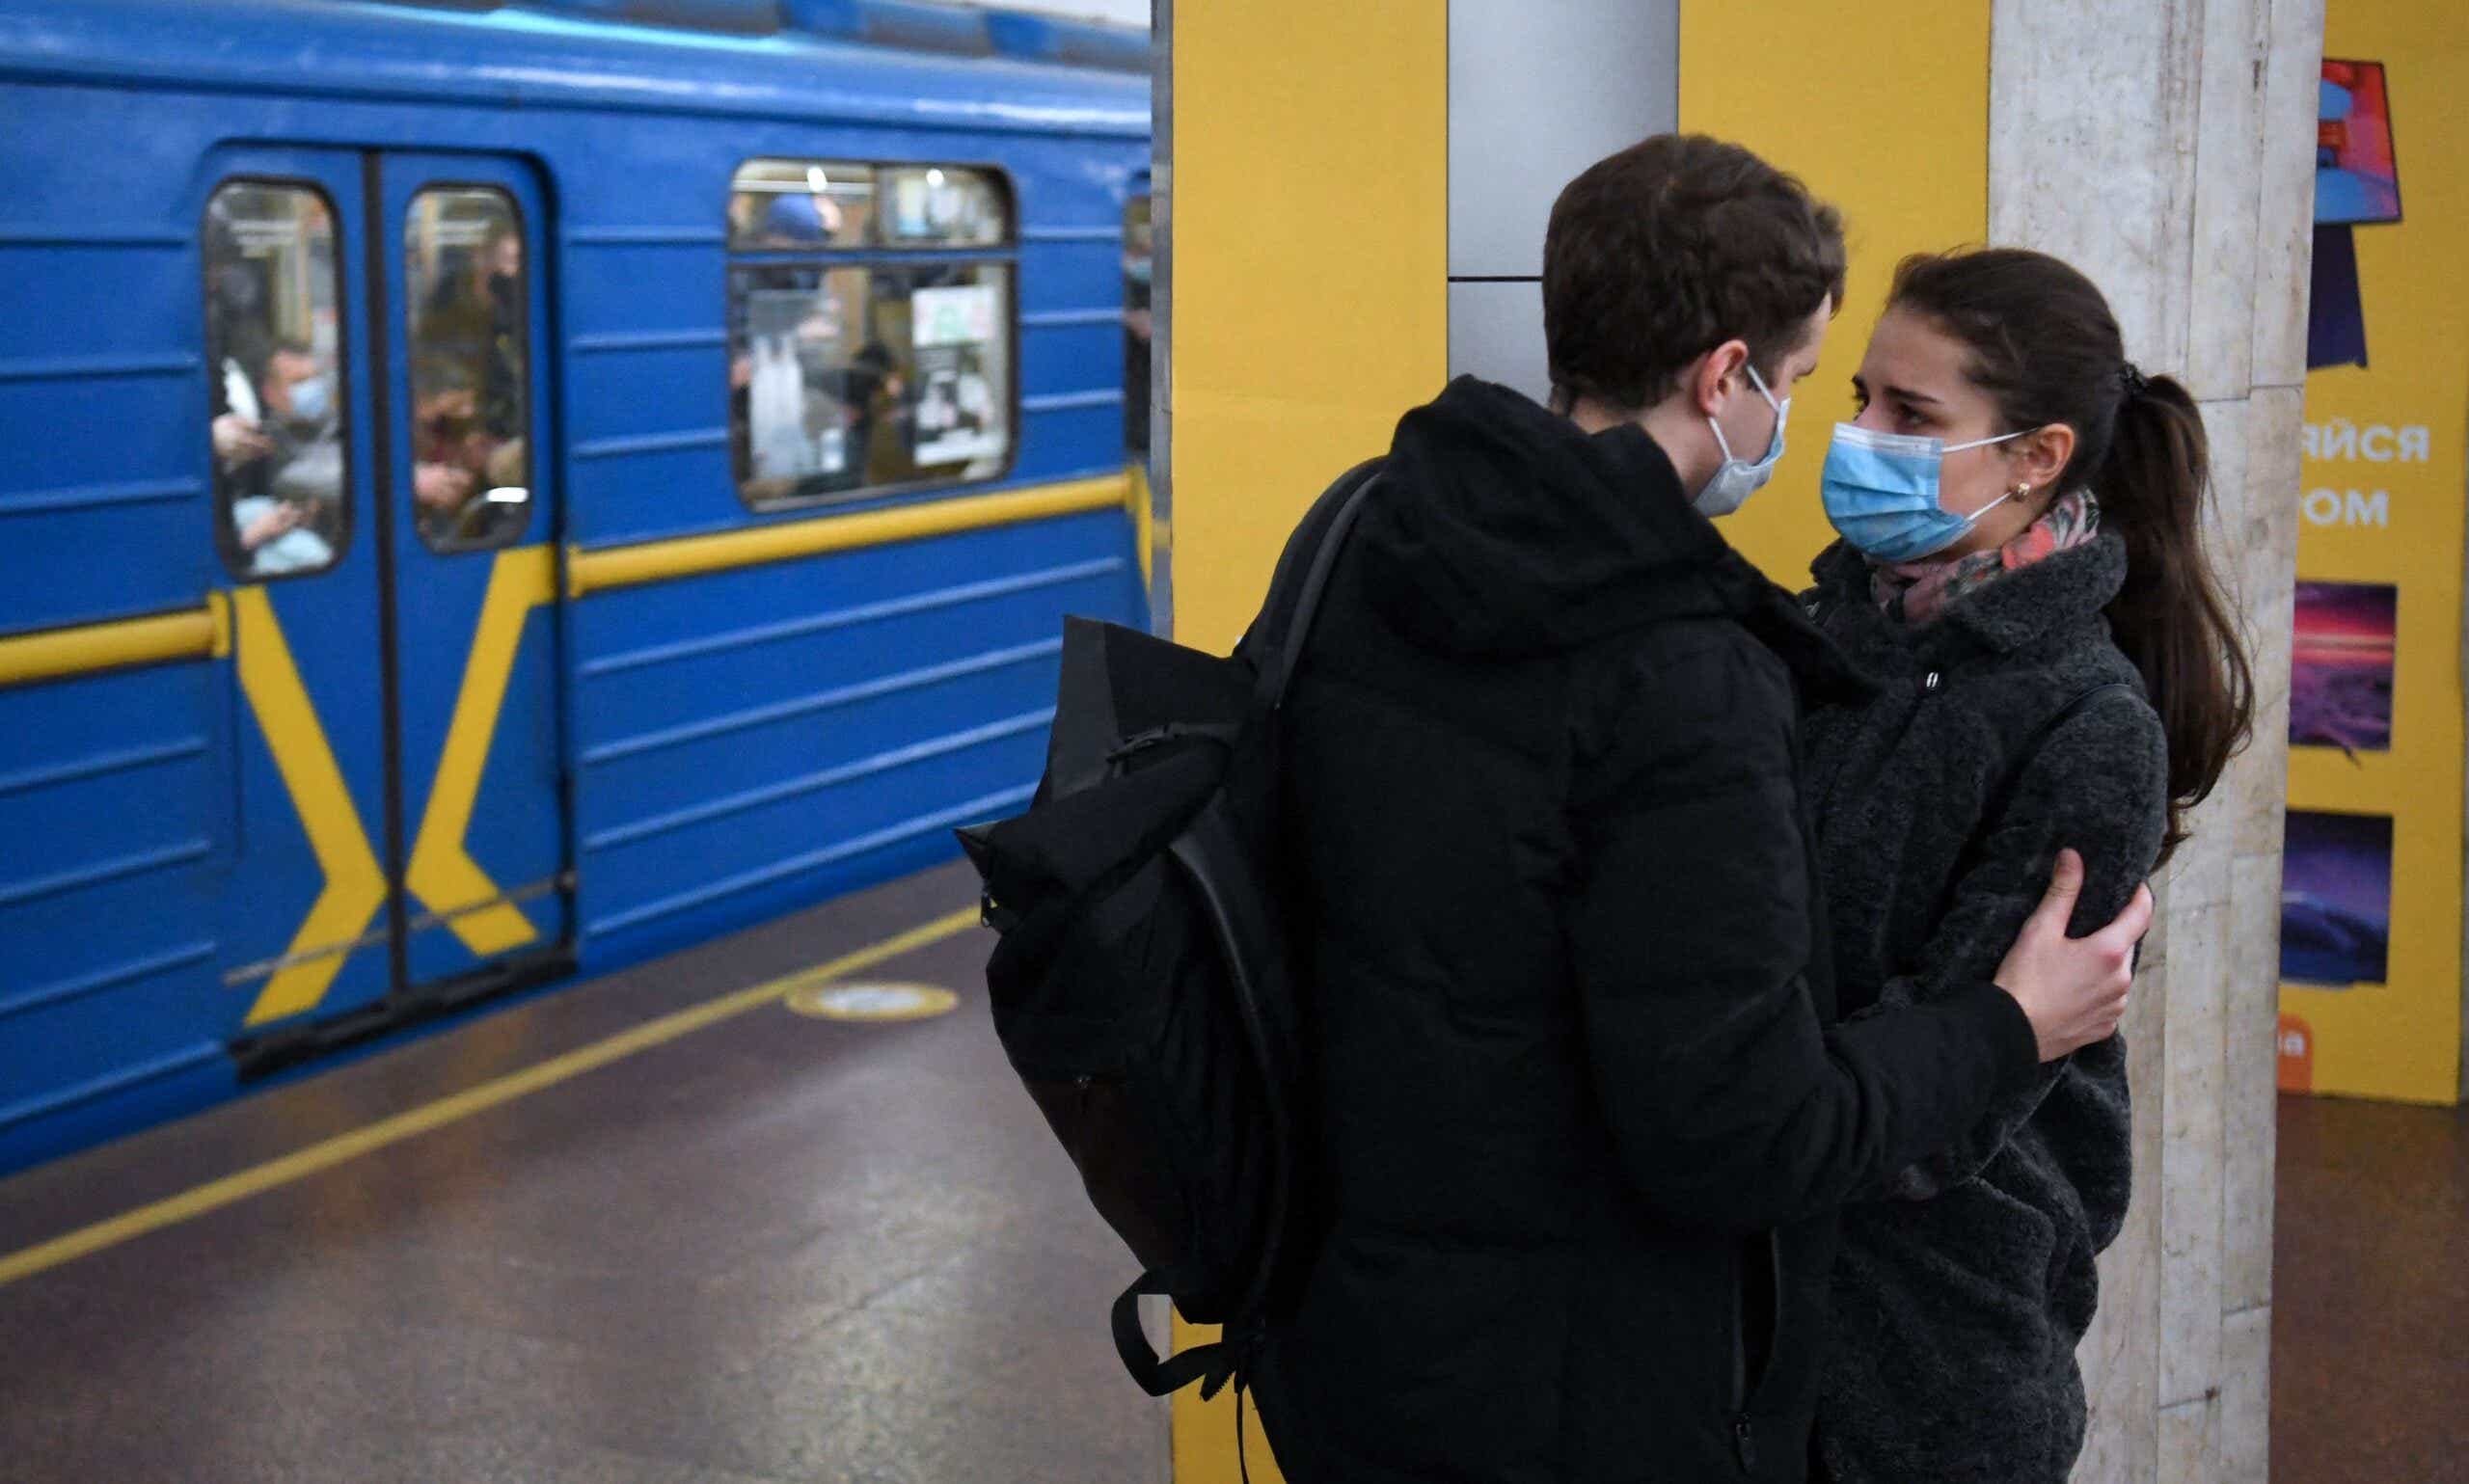 A scared-looking couple shared a moment this morning at a metro station in Ukraine's capital Kyiv